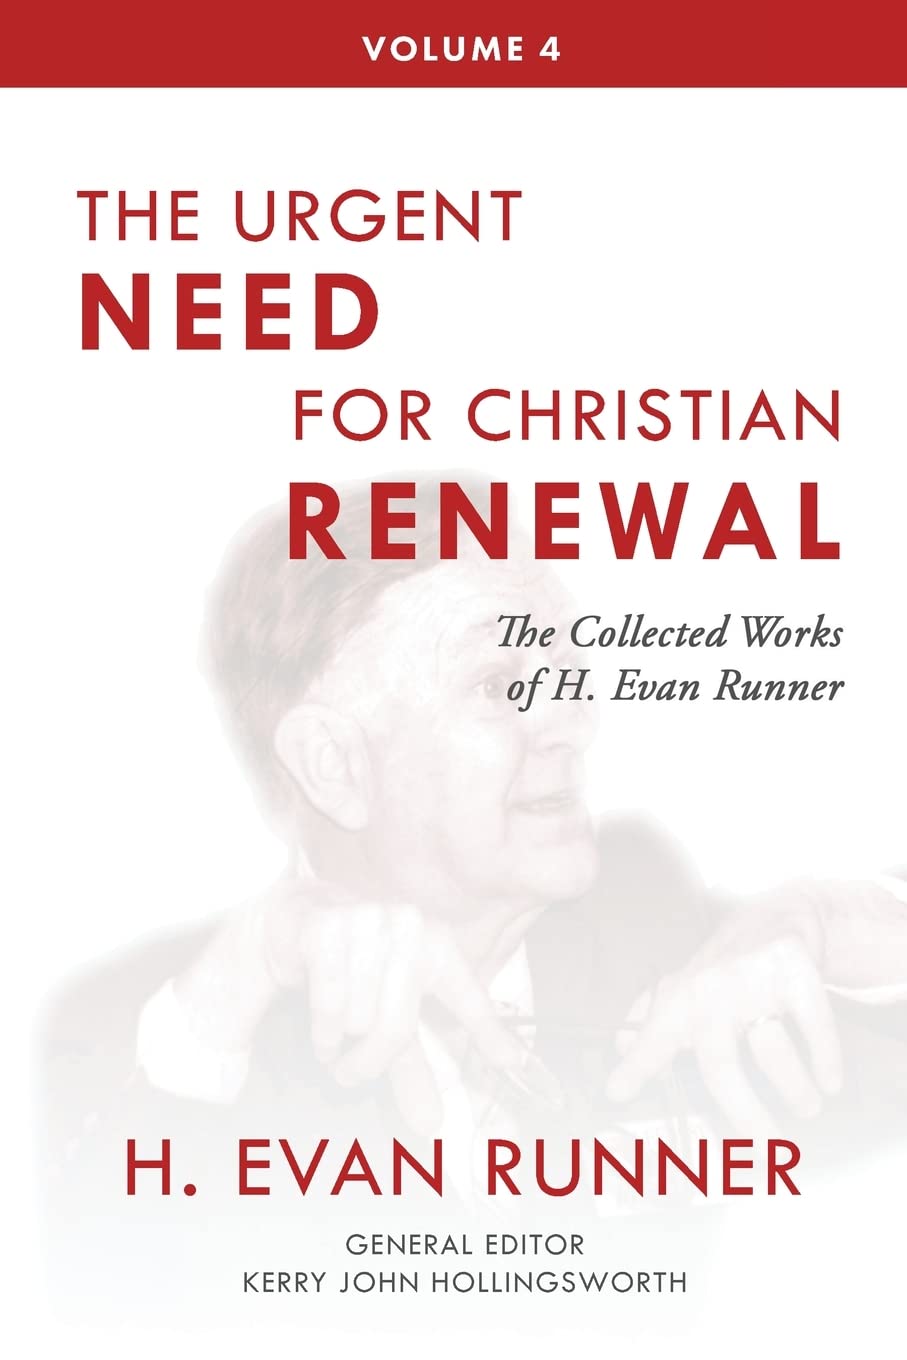 The Urgent Need for Christian Renewal: The Collected Works of H. Evan Runner, Vol. 4